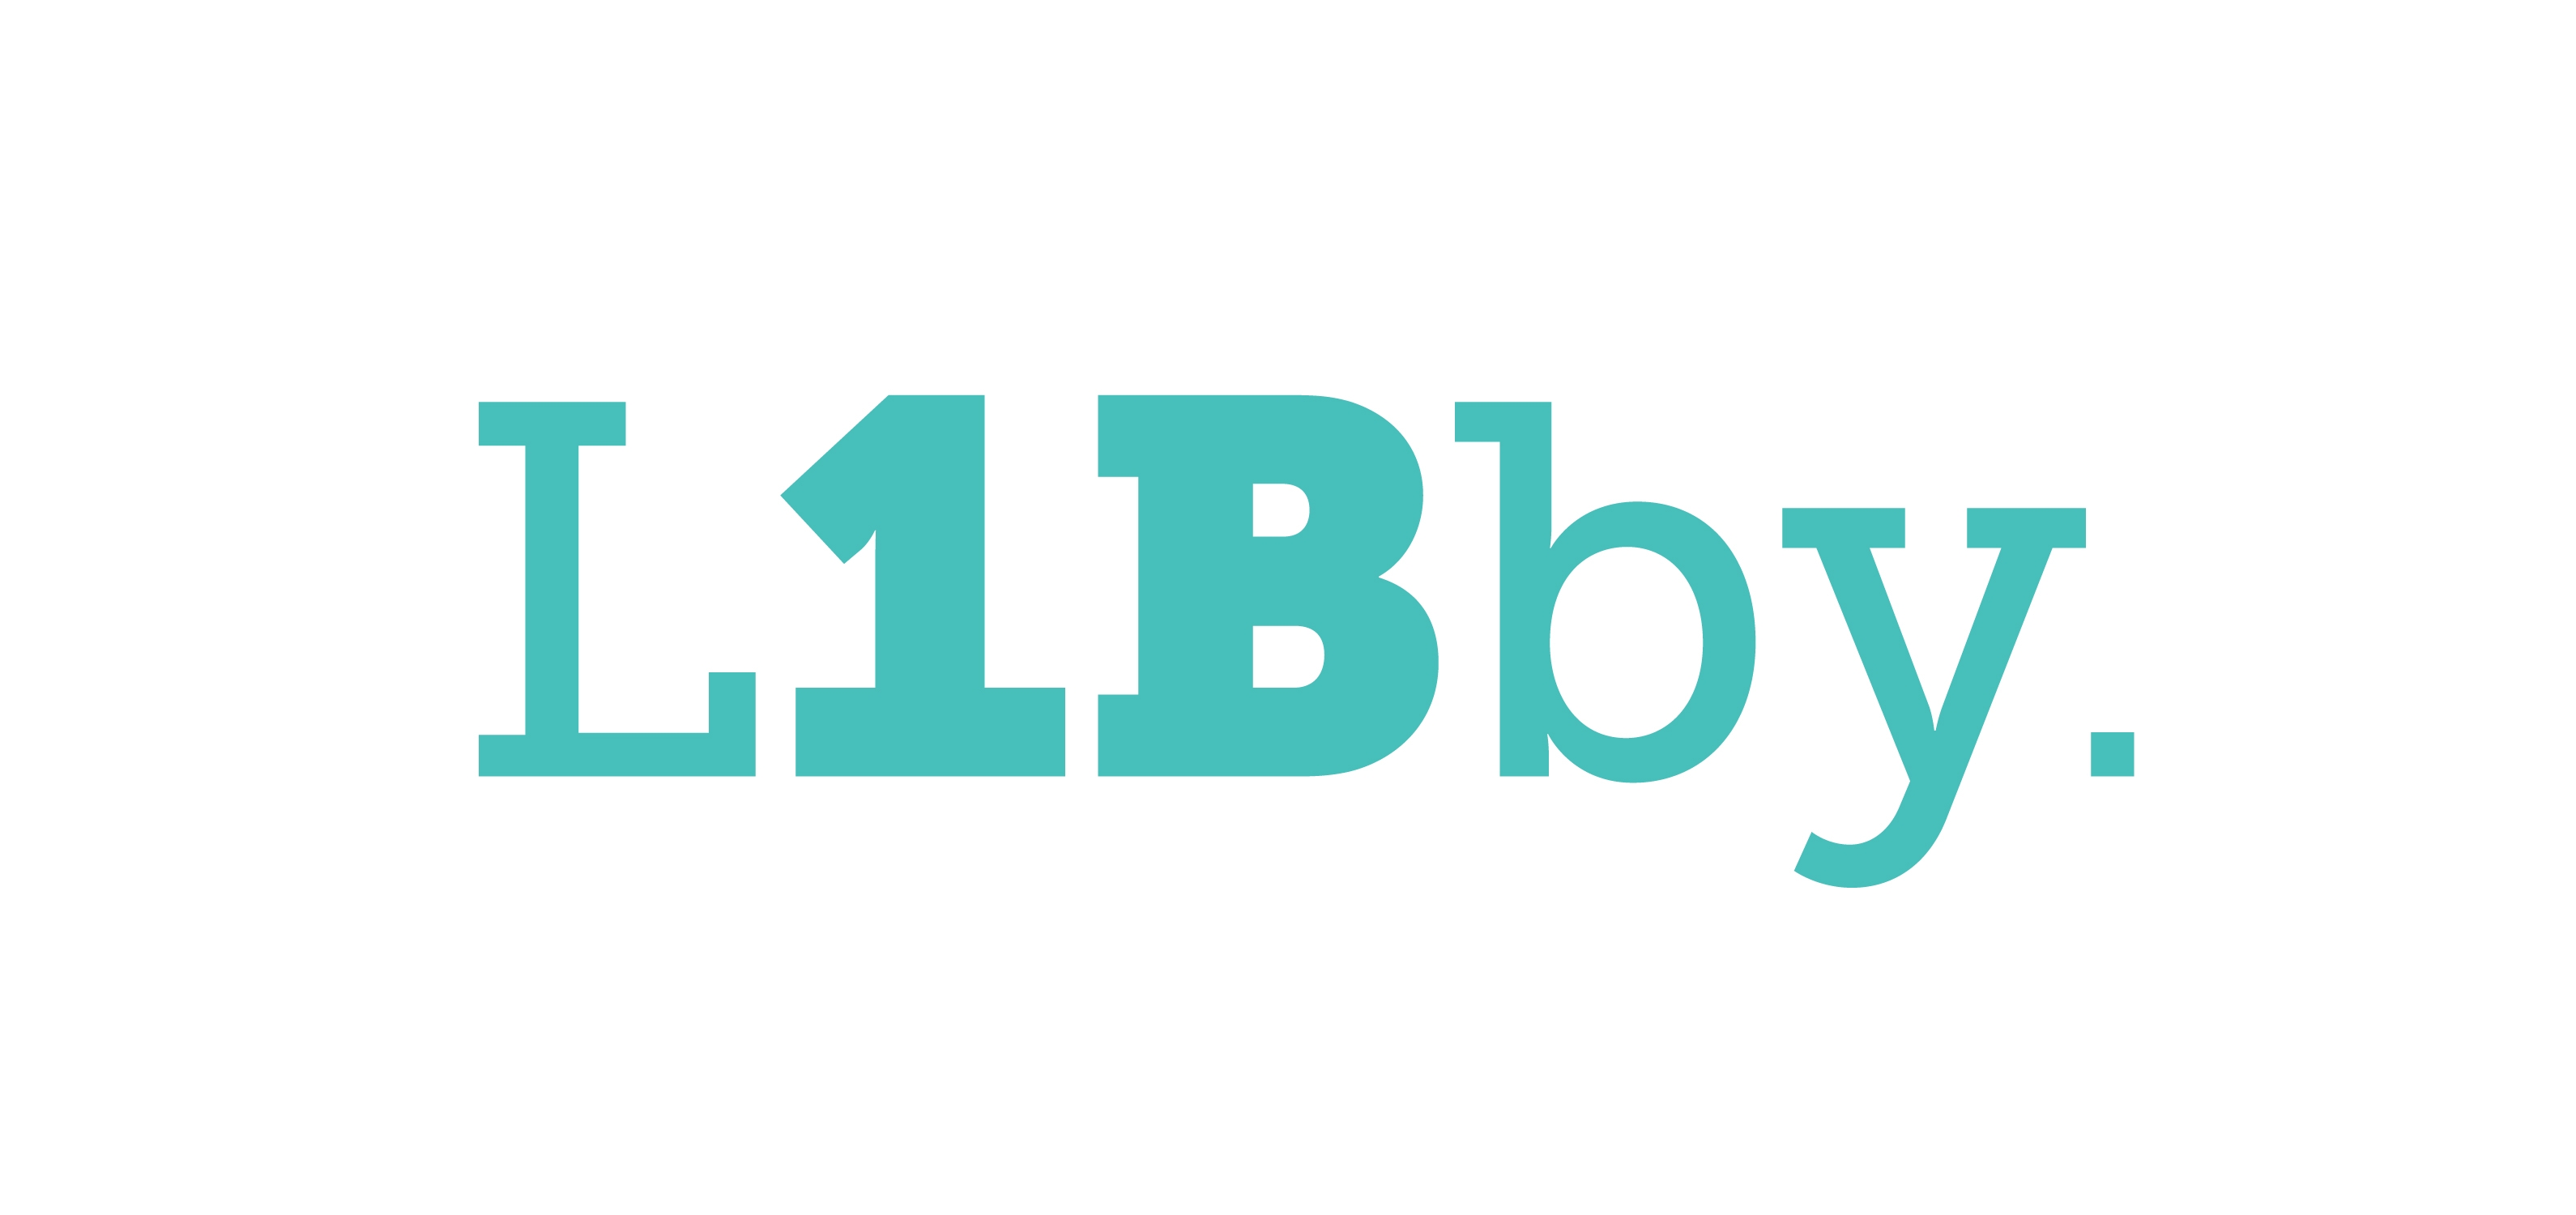 The Libby logo with a '1B' (in place of 'iB') to signify 1 billion digital checkouts